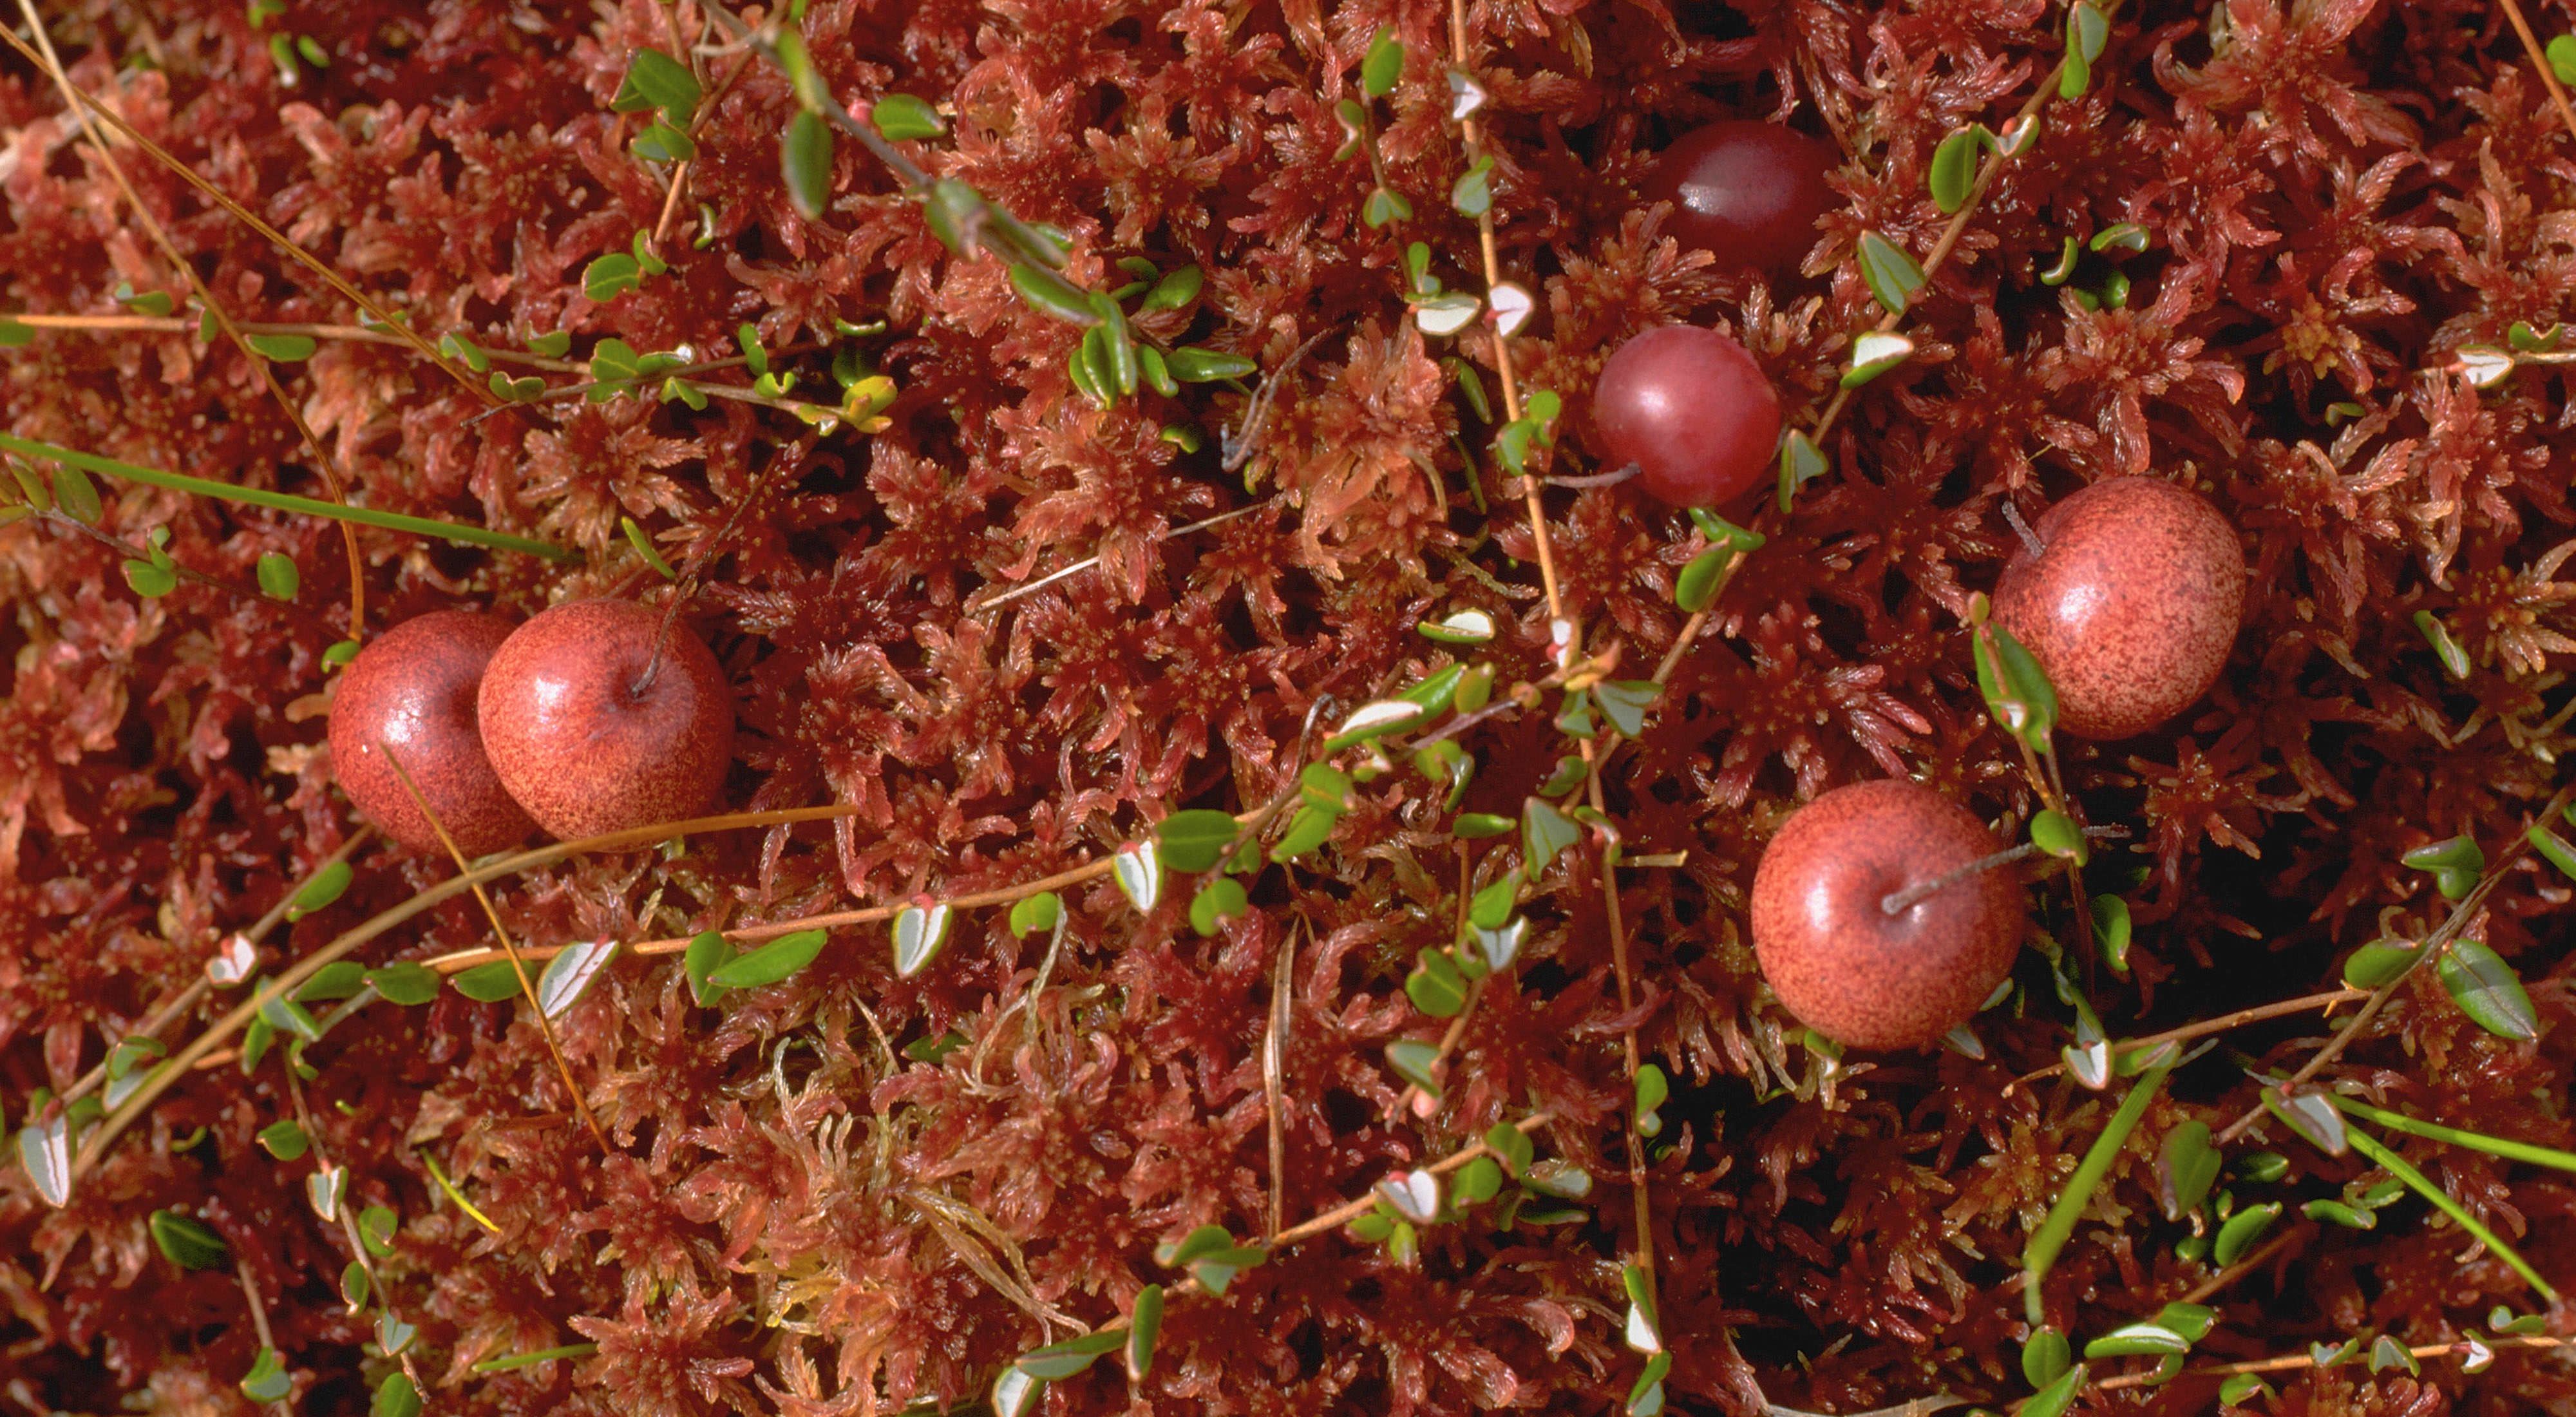 A close up view of  red cranberries and sphagnum moss.